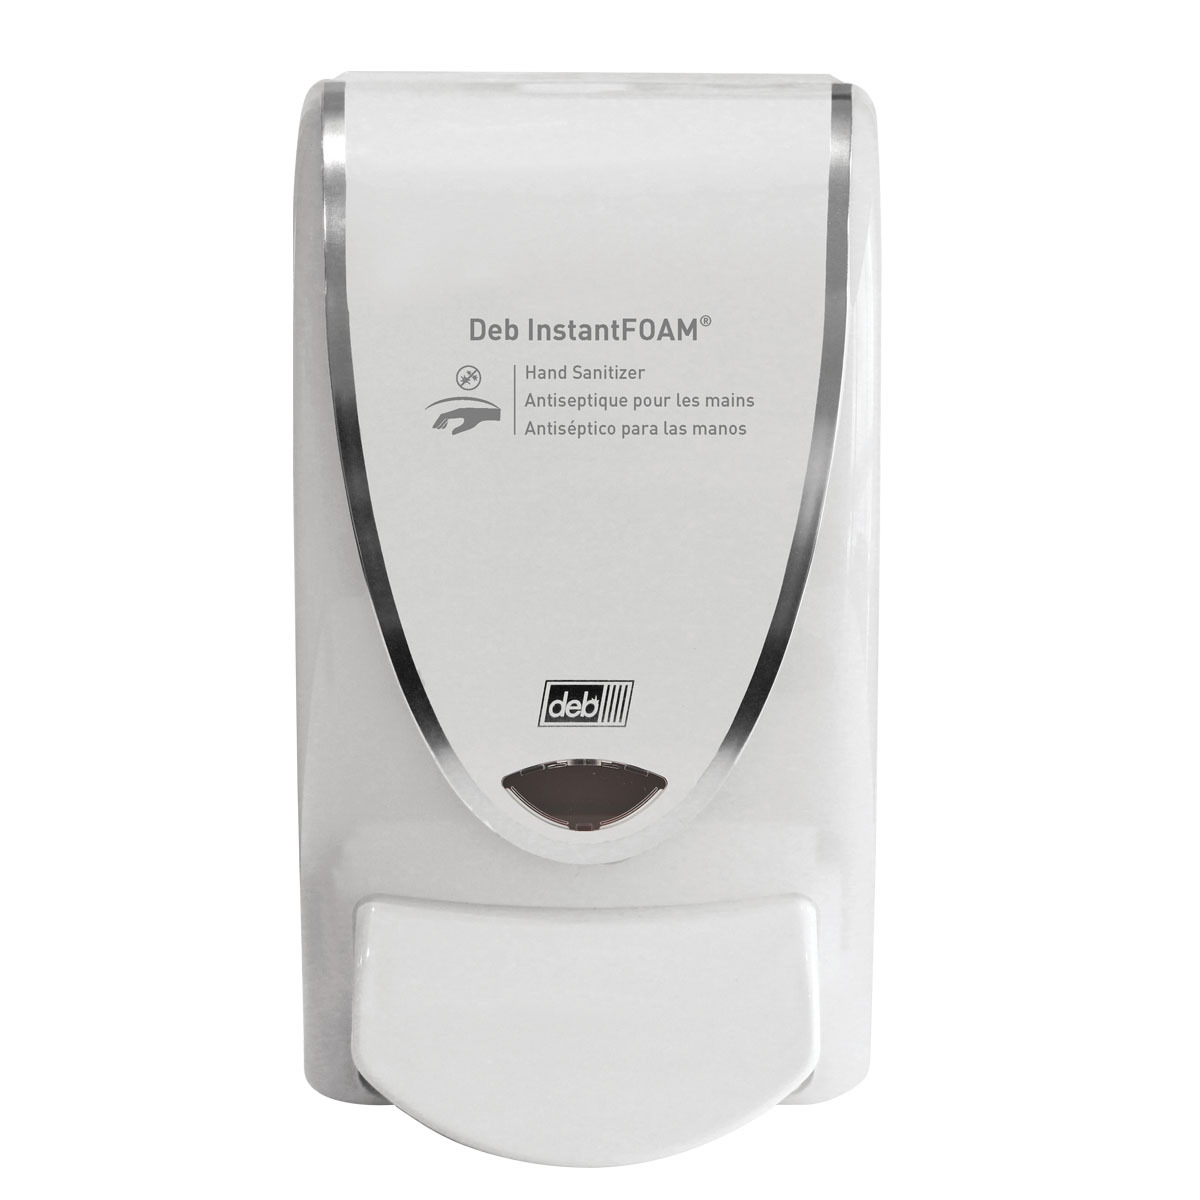 Deb 1 Liter White InstantFOAM® 1000 Scented Hand Sanitizer (Availability restrictions apply.)